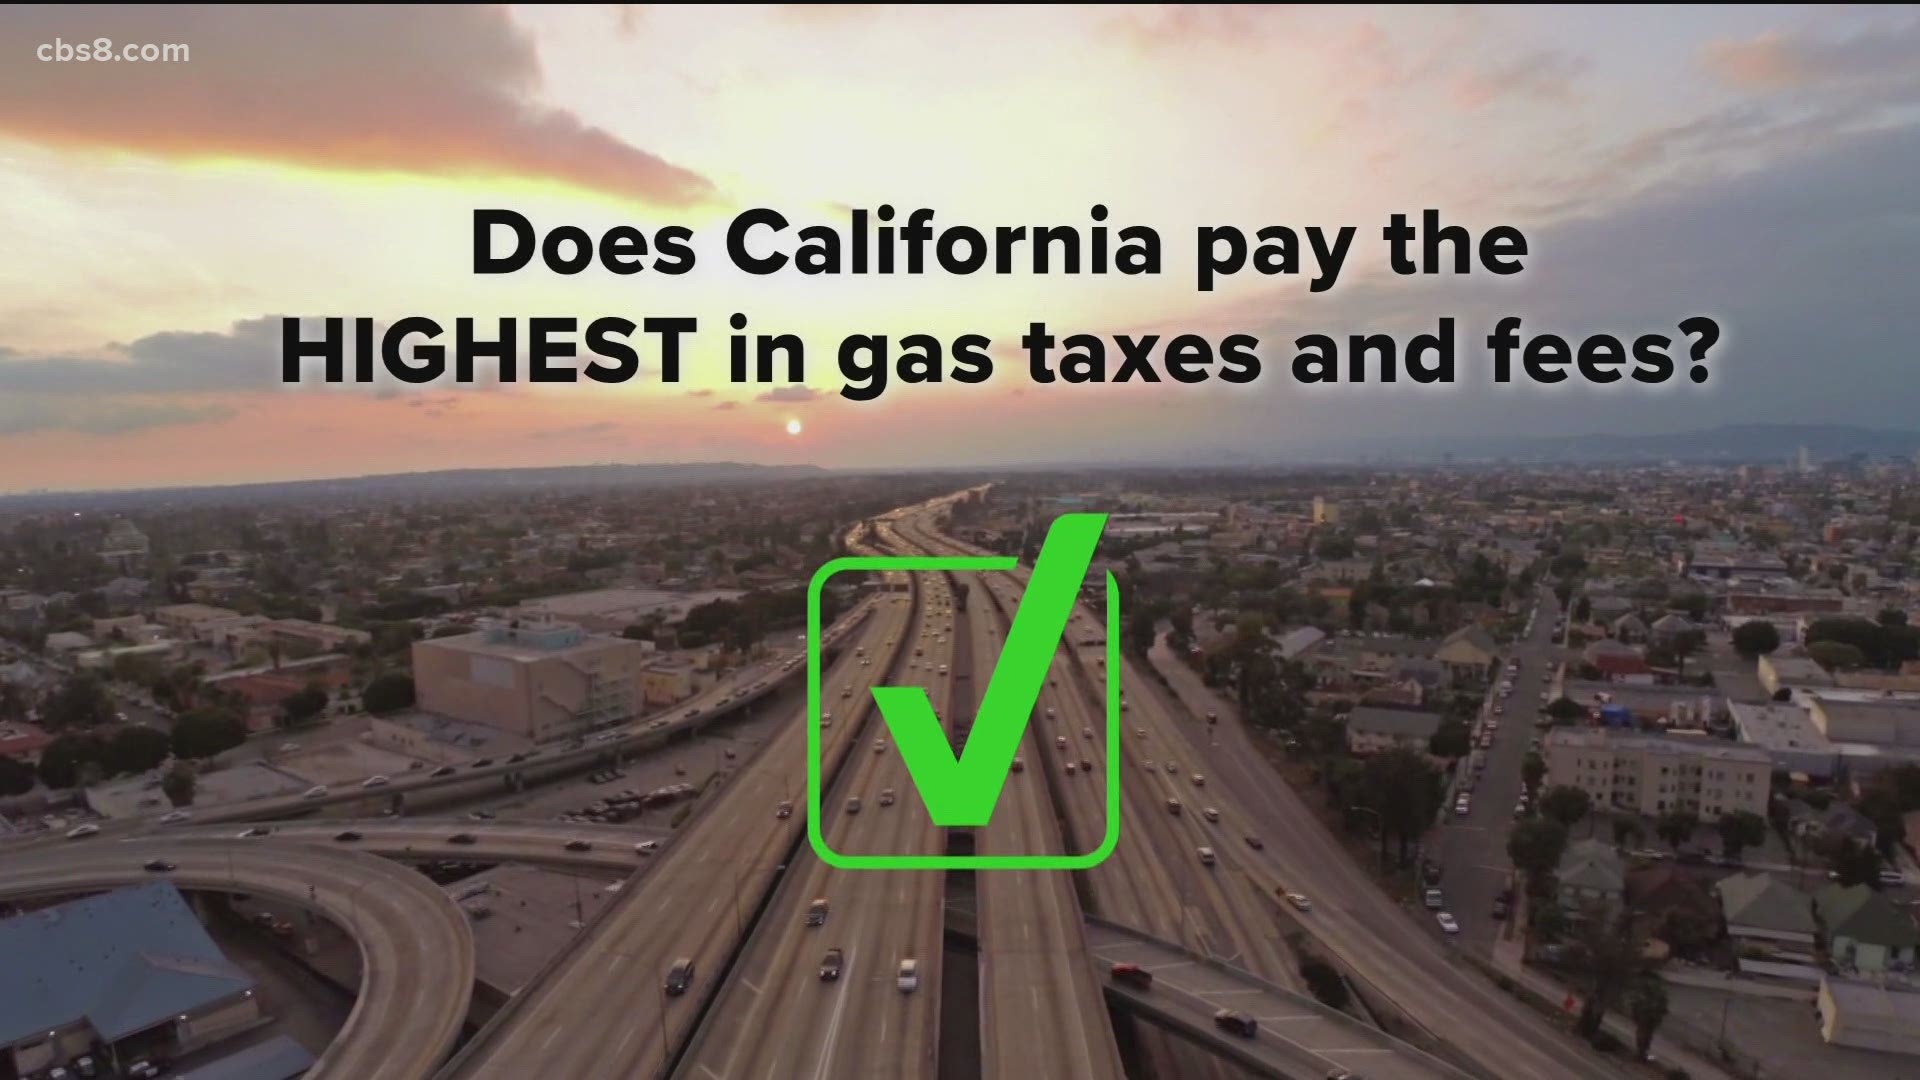 A Southern California firm says it adds up to $1.21 per gallon, the highest in the nation.